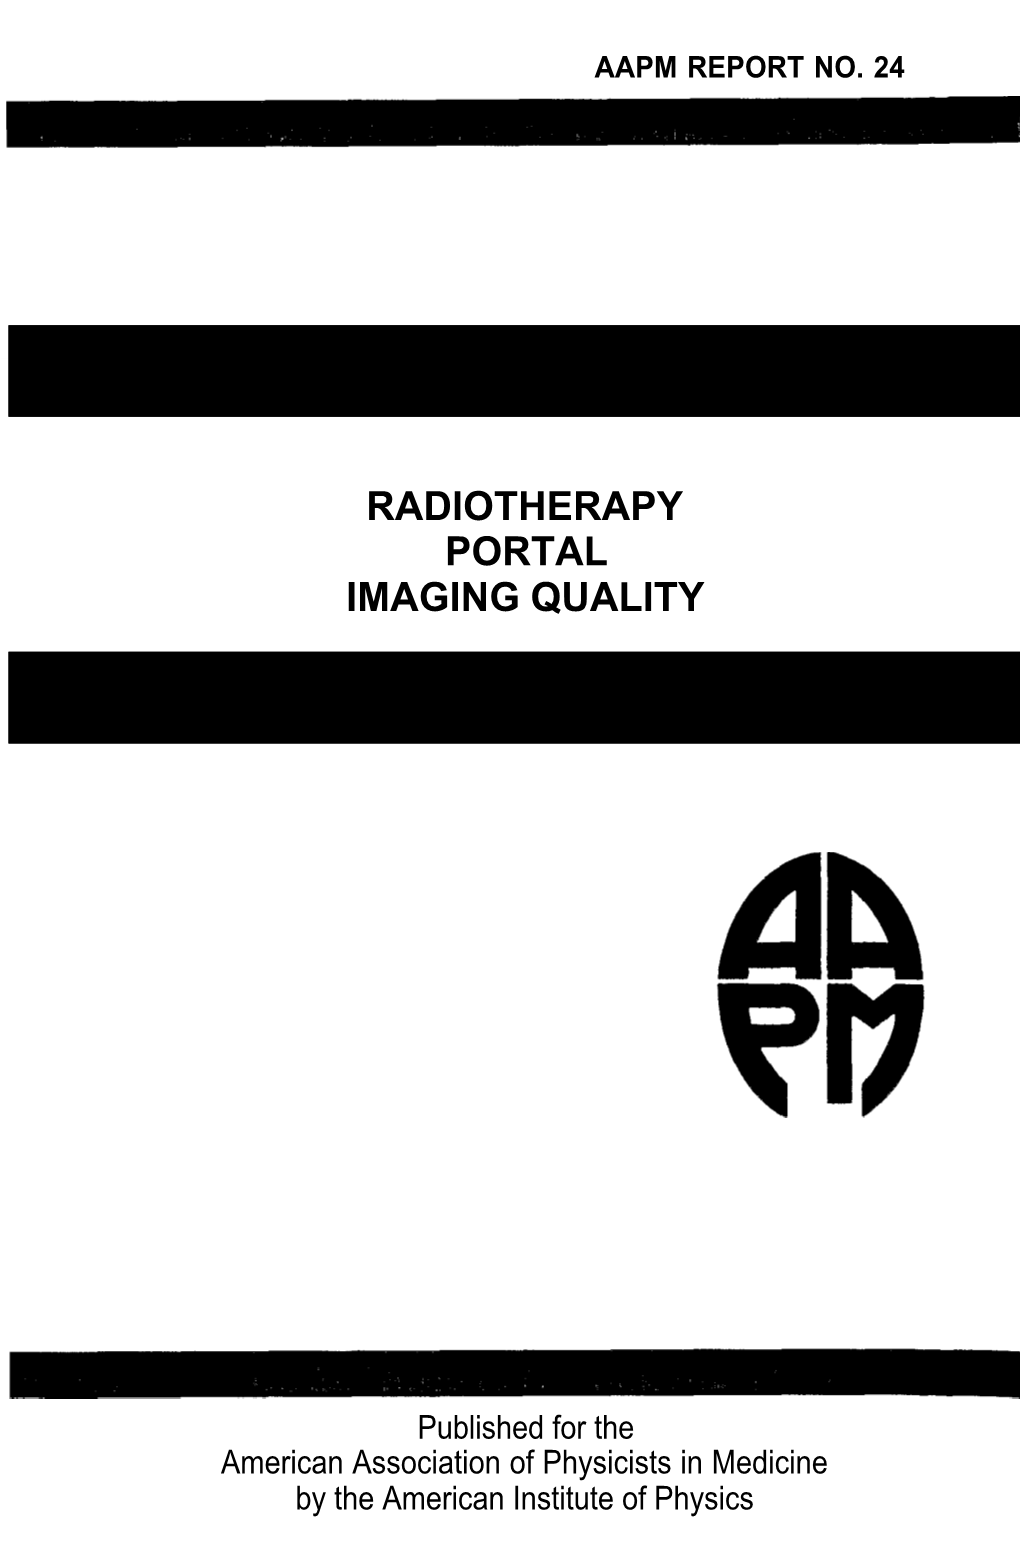 Radiotherapy Portal Imaging Quality